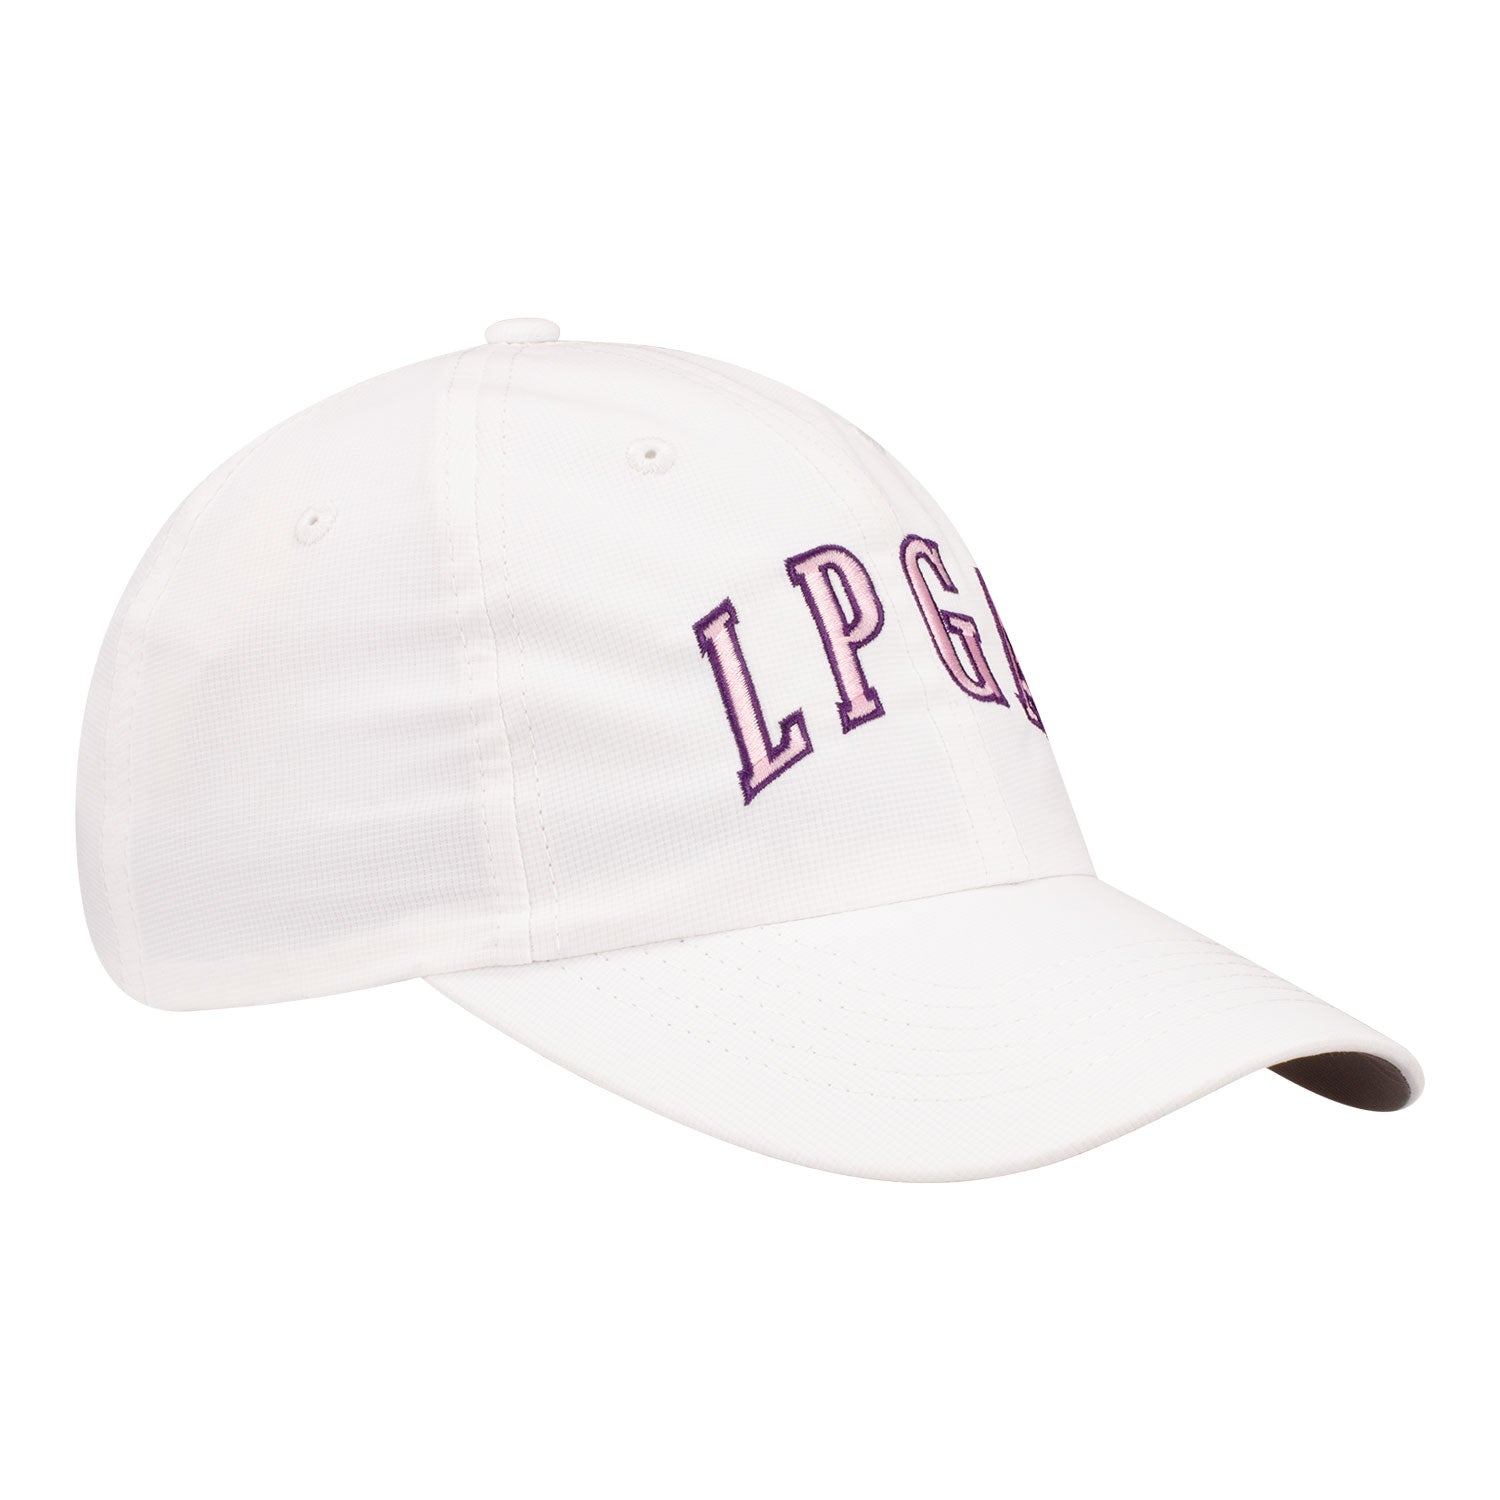 Imperial LPGA Women's Hat in White - Angled Right Side View